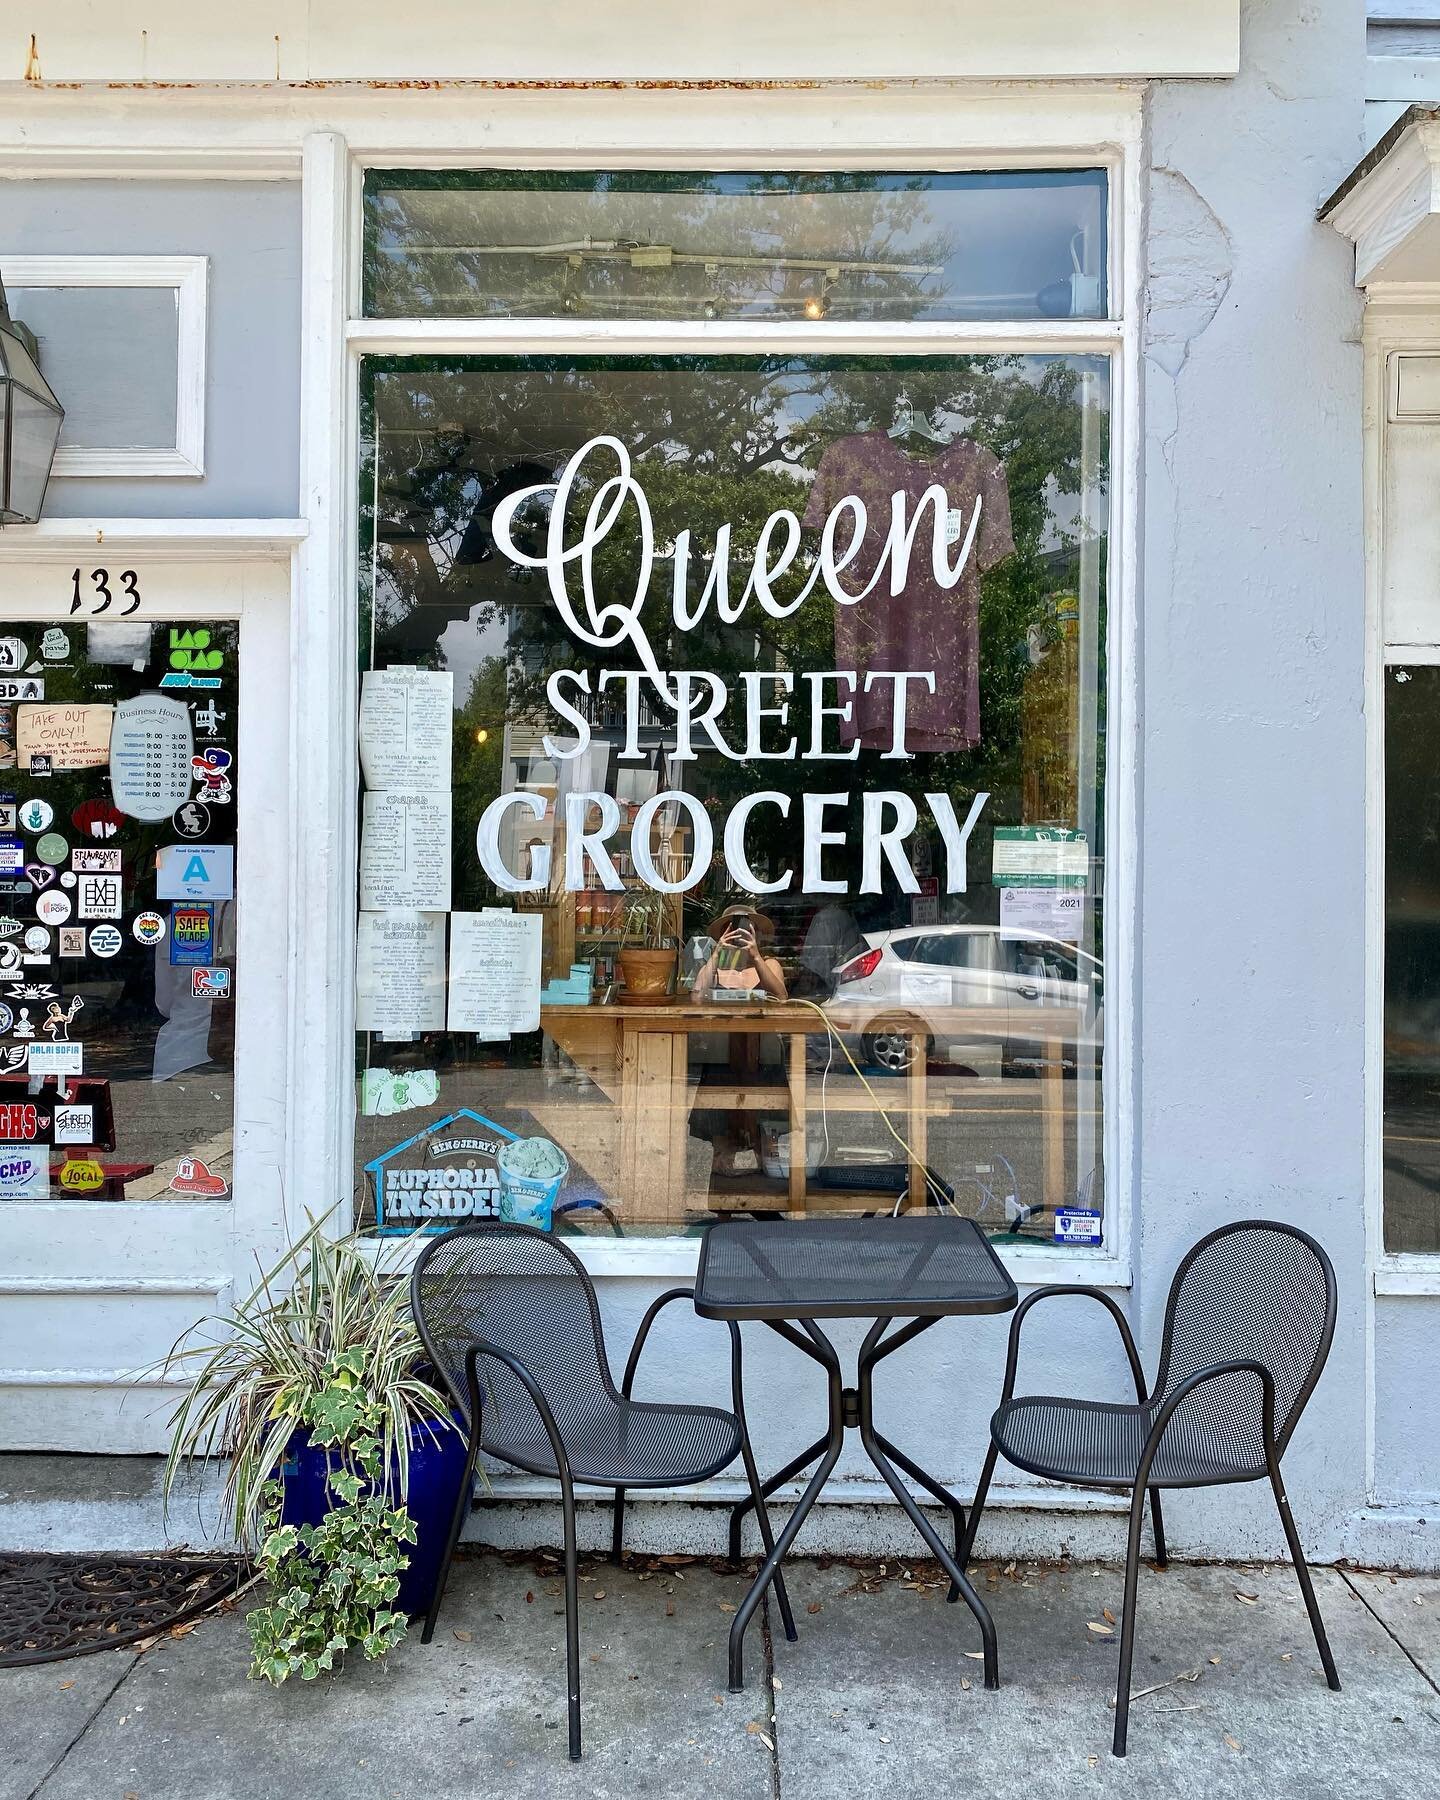 Order up! @queenstreetgrocery is one of our top spots in Charleston to grab a sandwich. An old fashioned grocery &amp; cafe spot. Stop by and try the Egypt 80, you won&rsquo;t be disappointed #wetraveledwhere